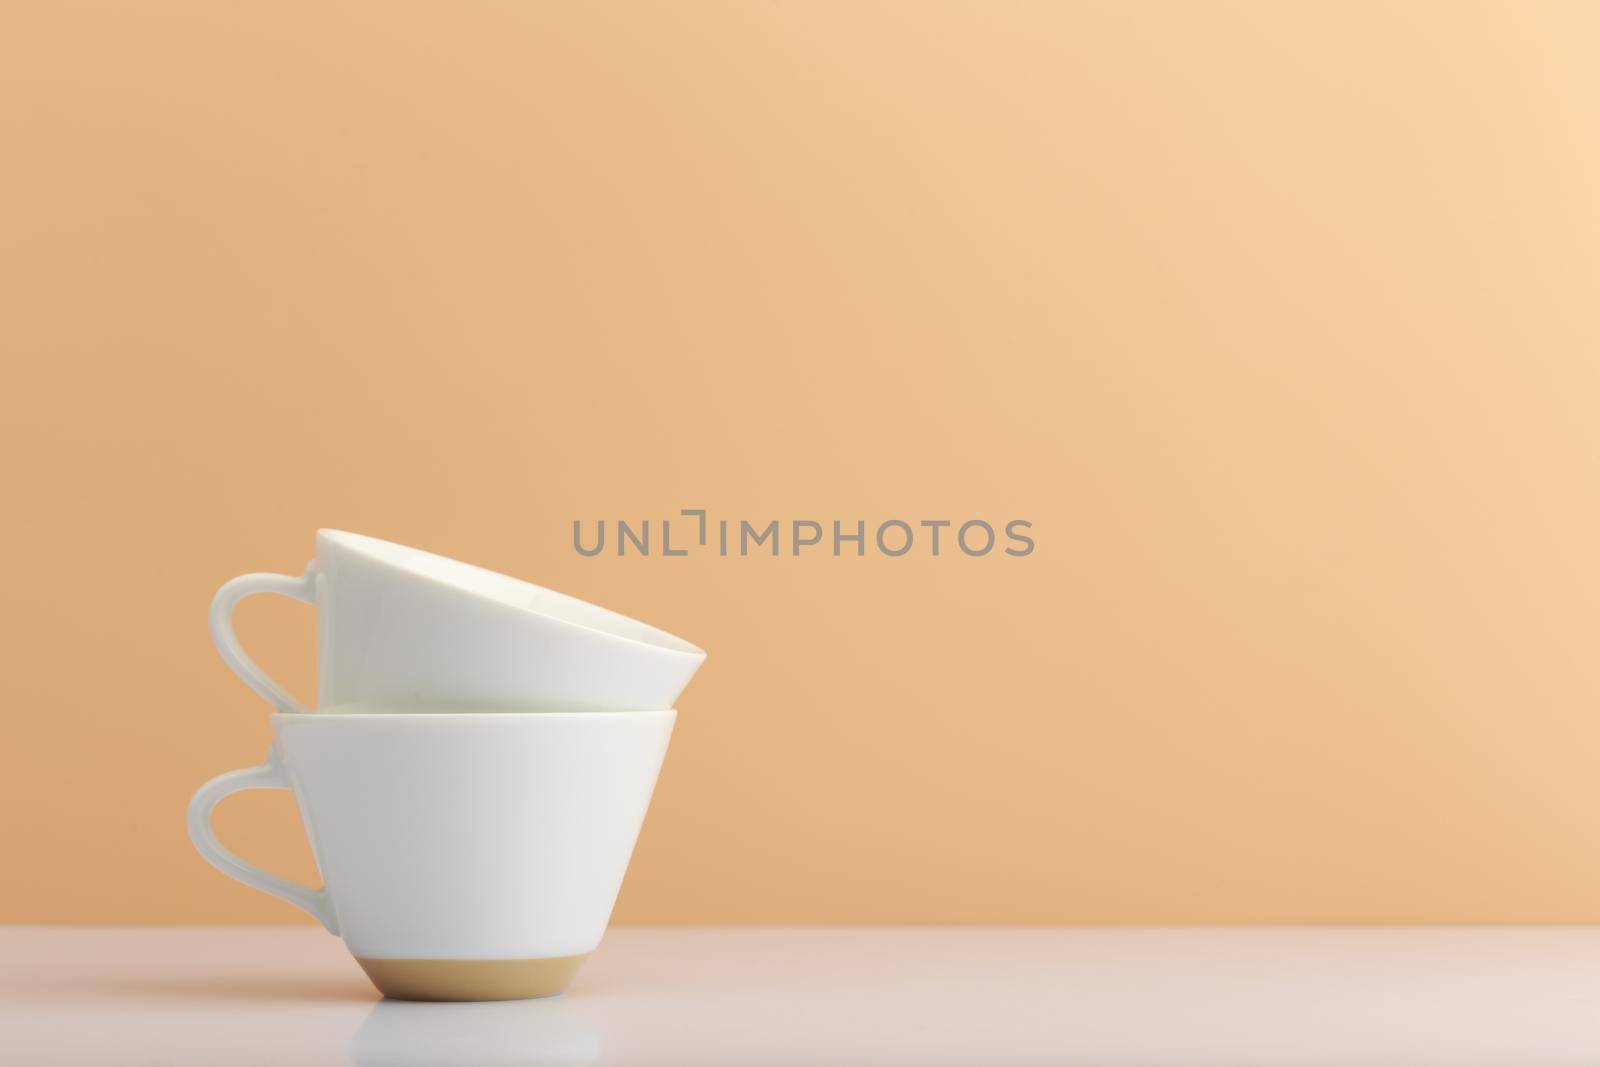 Two white ceramic cups one in another on white table against light beige background with copy space. by Senorina_Irina